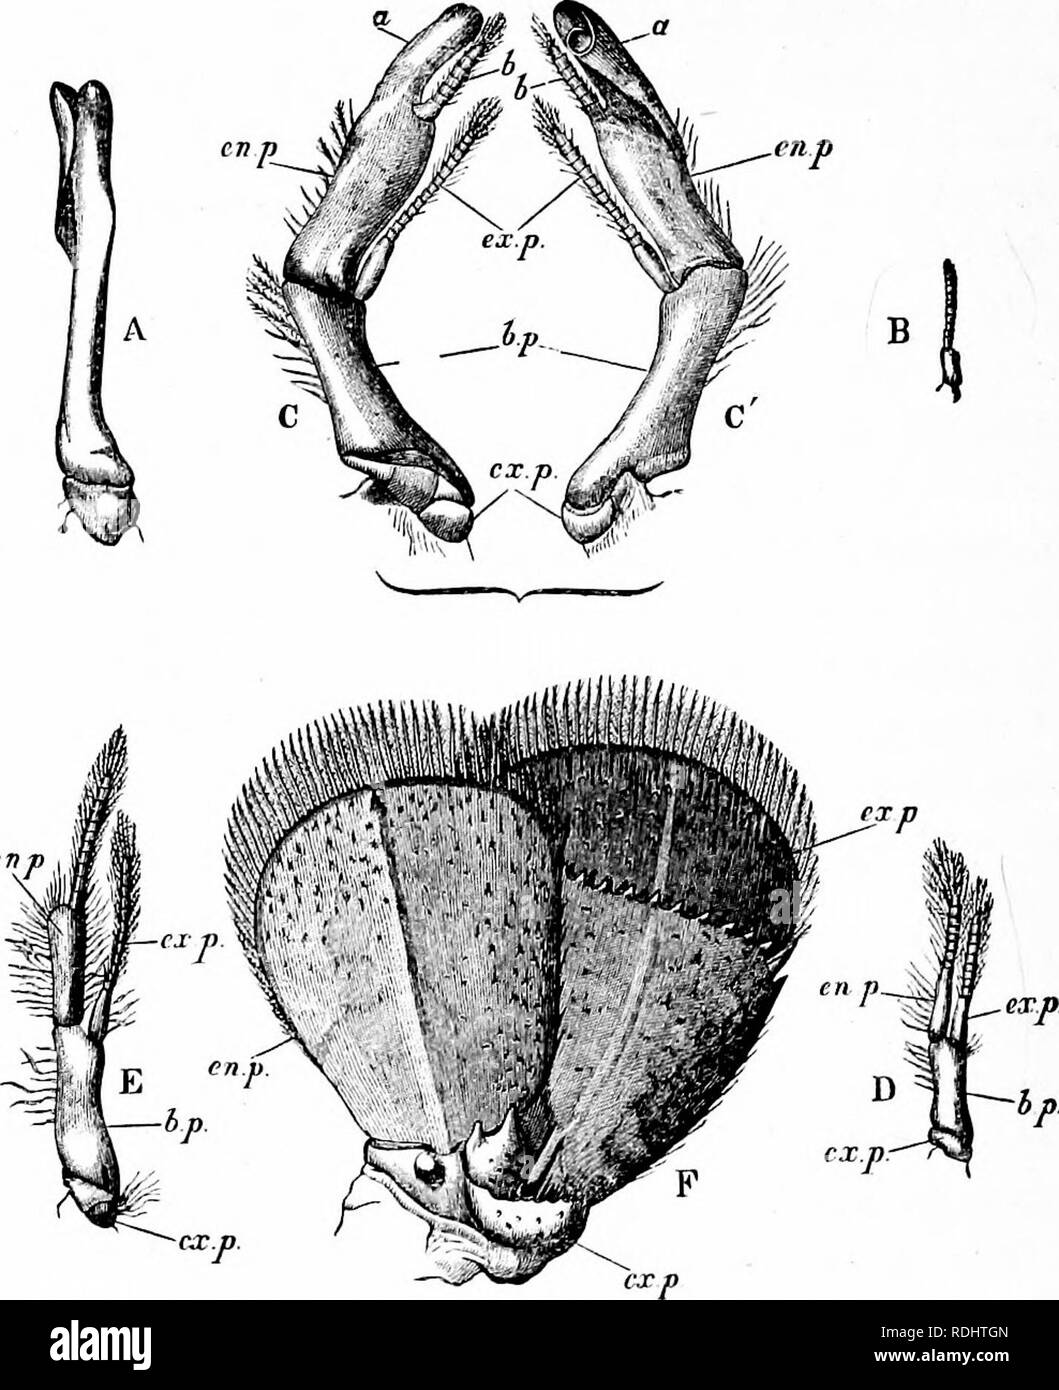 . The crayfish : an introduction to the study of zoology . Crayfish. Fig. 37.—Adaens flimatiUs.—Appendages of the left side of the abdo- men ( x 3). A, the posterior face of the first appendage of the male ; B, the same of the female ; C, posterior, and C, anterior faces of the second appendage of the male ; D, the third appendage of tl e male; E, the same of the female ; F, the sixth appendage, a, the rolled plate of the endopoditi • h, the jointed extremity of the same ; bp., basipodite ; cx.p., coxopodite ; vn.p., endopodite ; ex.p., exopodite.. Please note that these images are extracted f Stock Photo